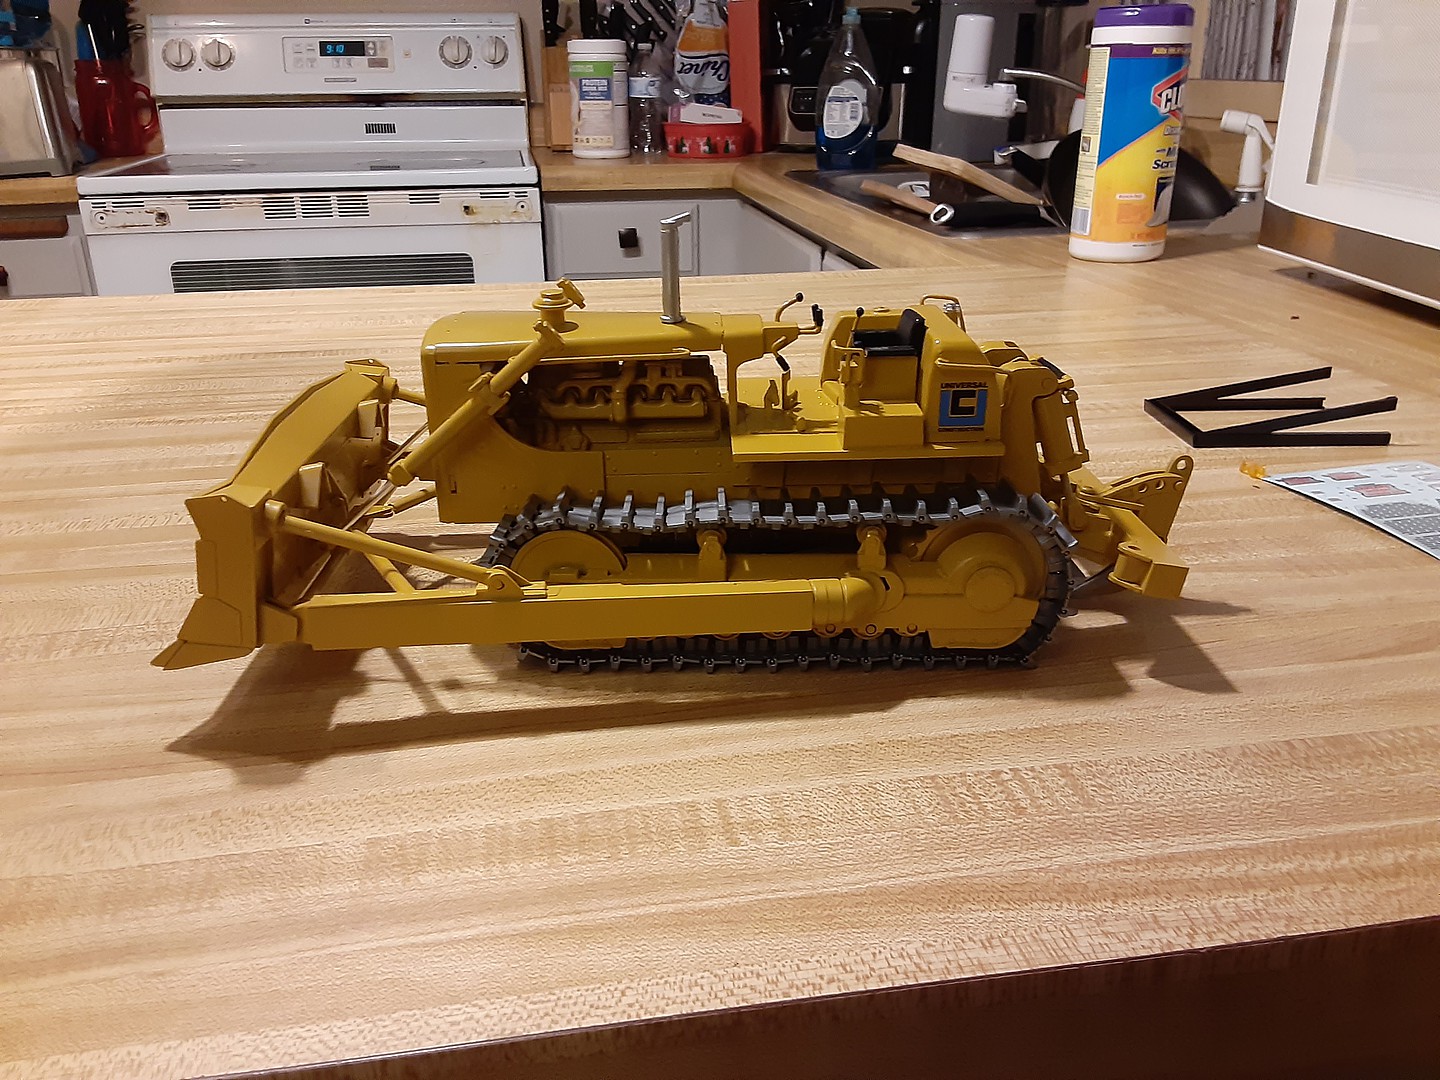 WINCH With Fairlead KIT FOR AMT 1/25 SCALE BULLDOZER MODEL 